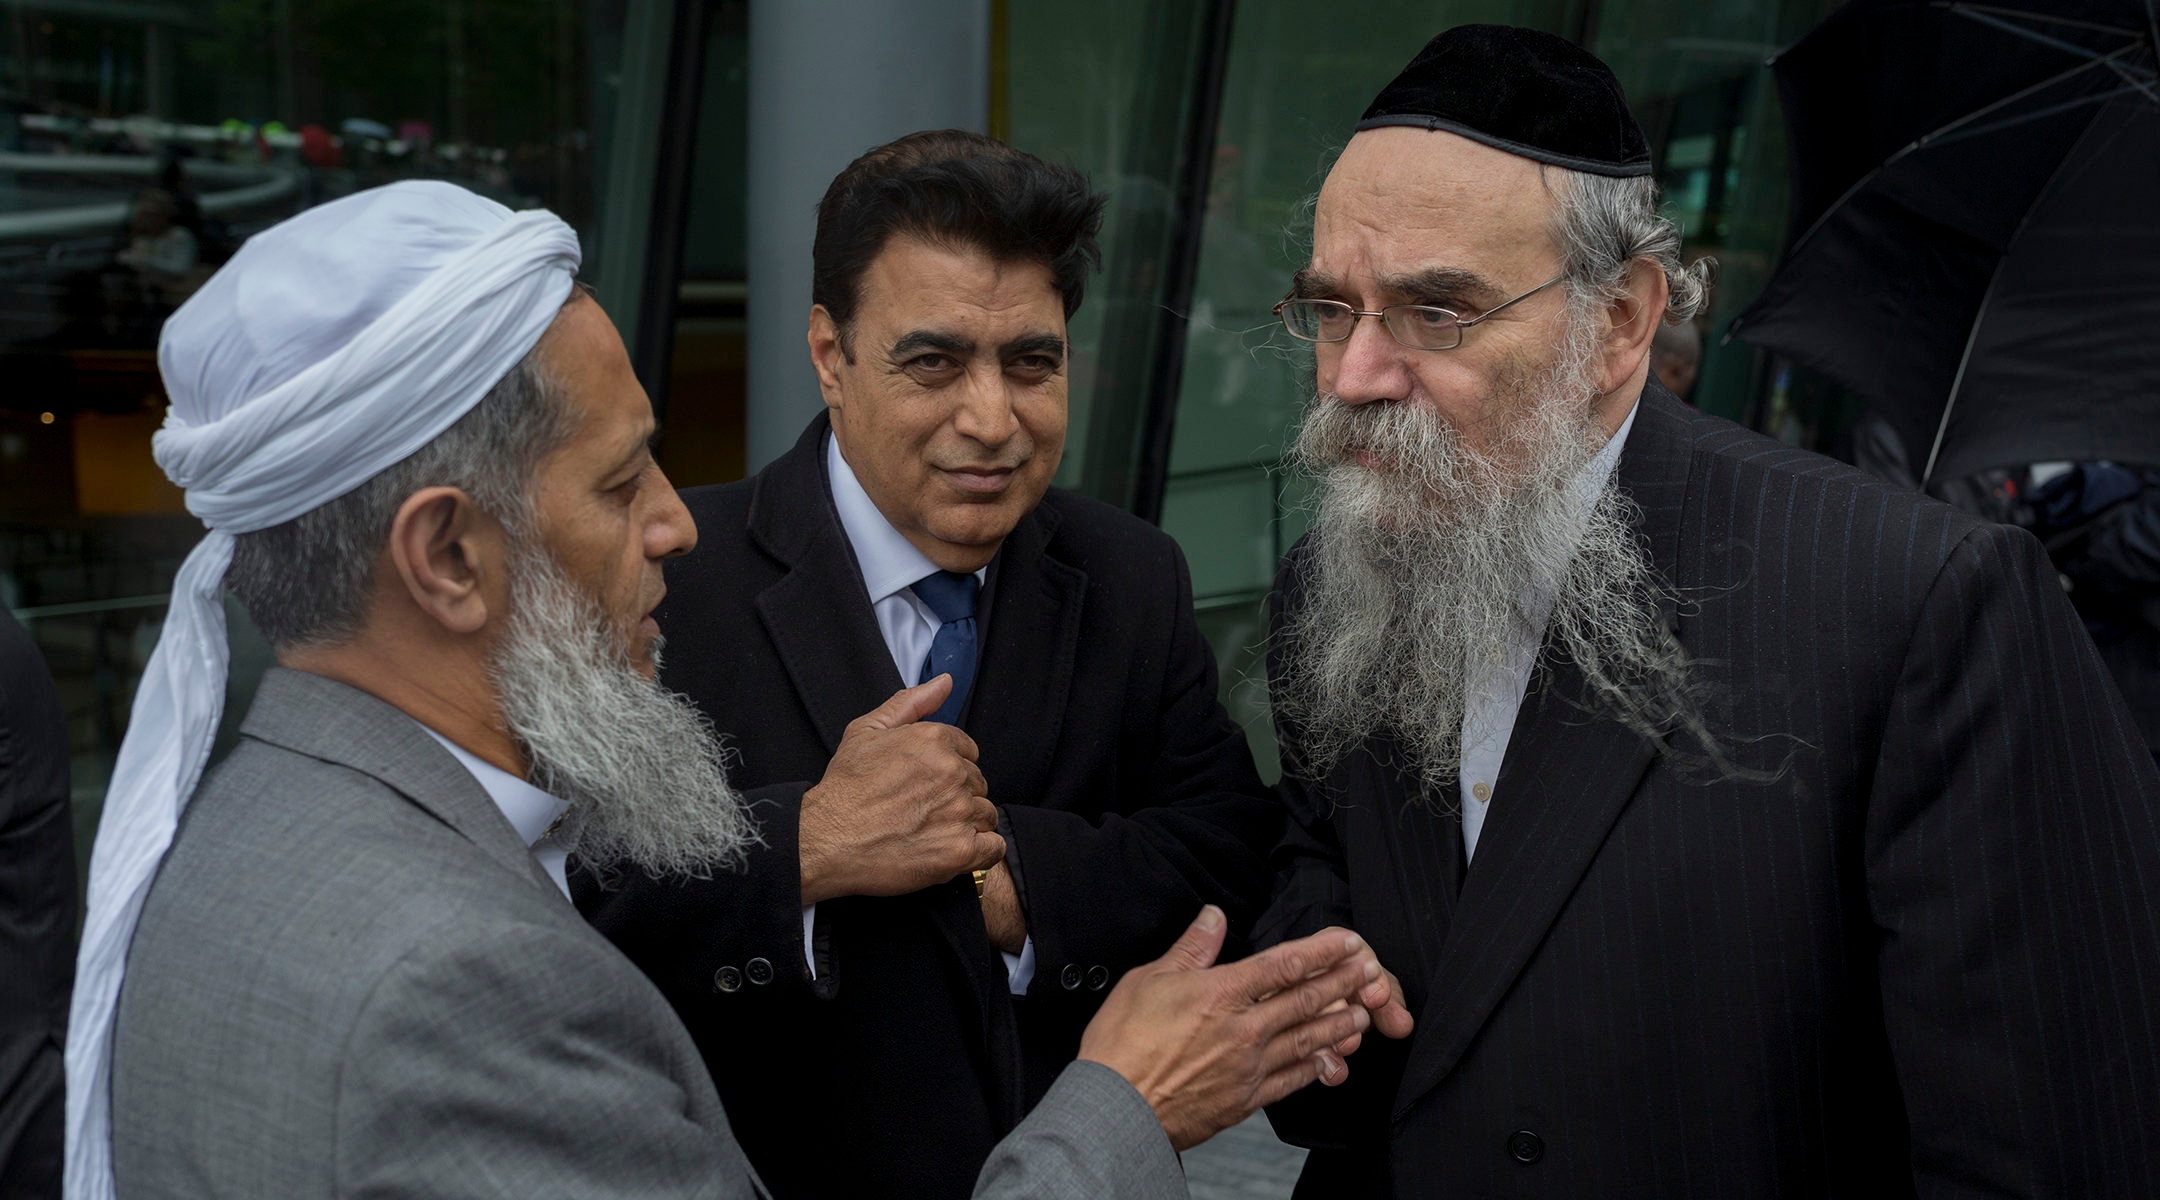 Rabbi Avrohom Pinter, right, speaking with other community leaders in London, the United Kigdom on June 5, 2017. (Richard Baker/In Pictures via Getty Images Images)